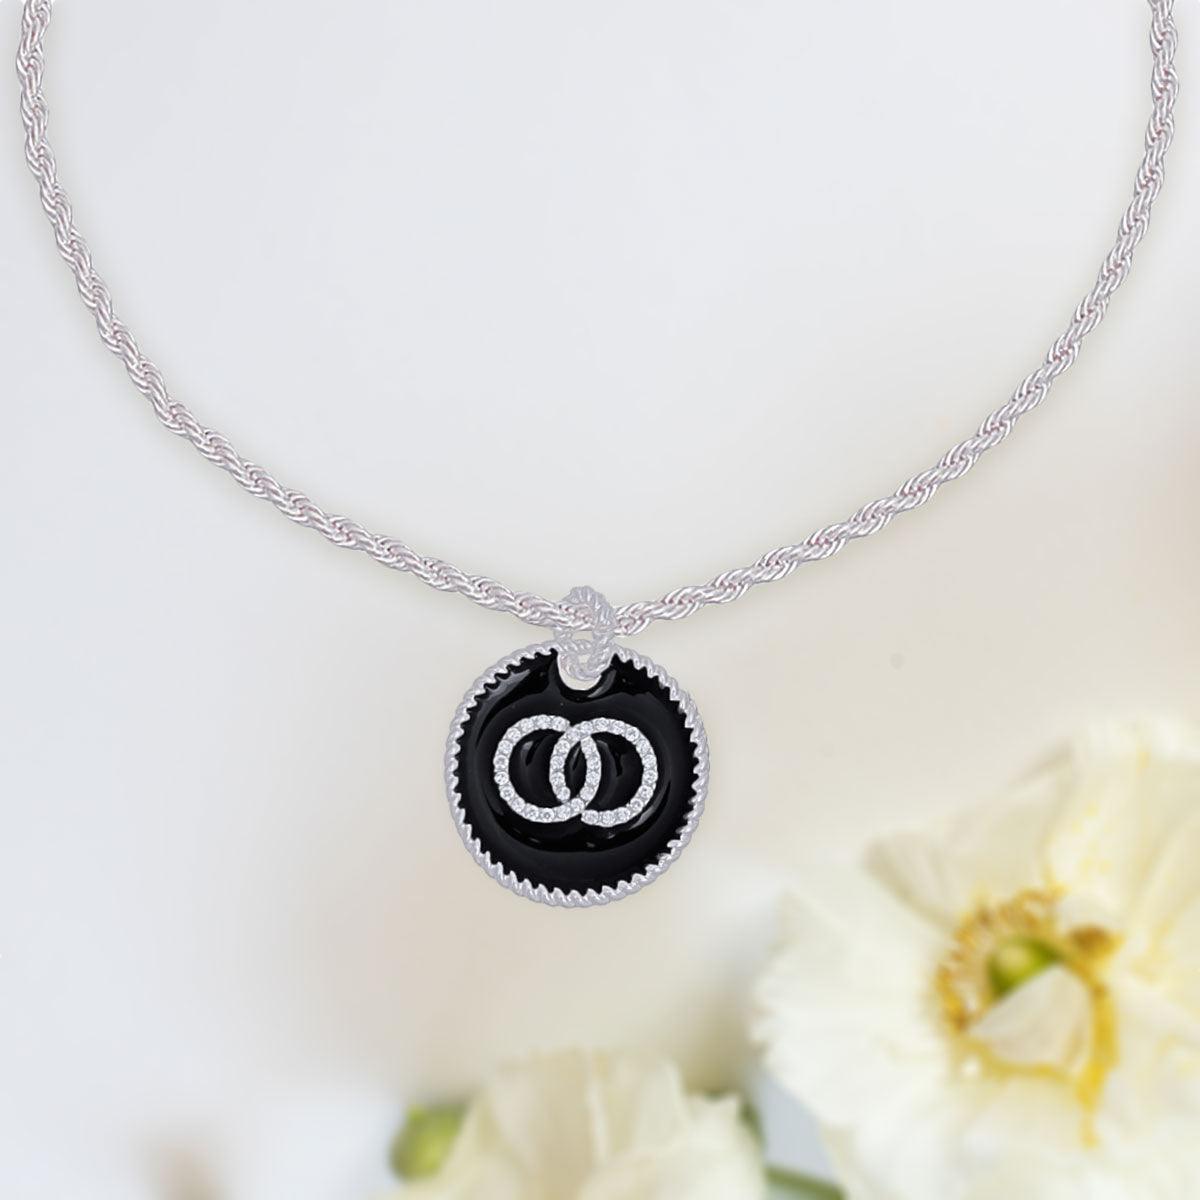 Clear Infinity Silver Necklace: Effortless Elegance - Fashion Jewelry